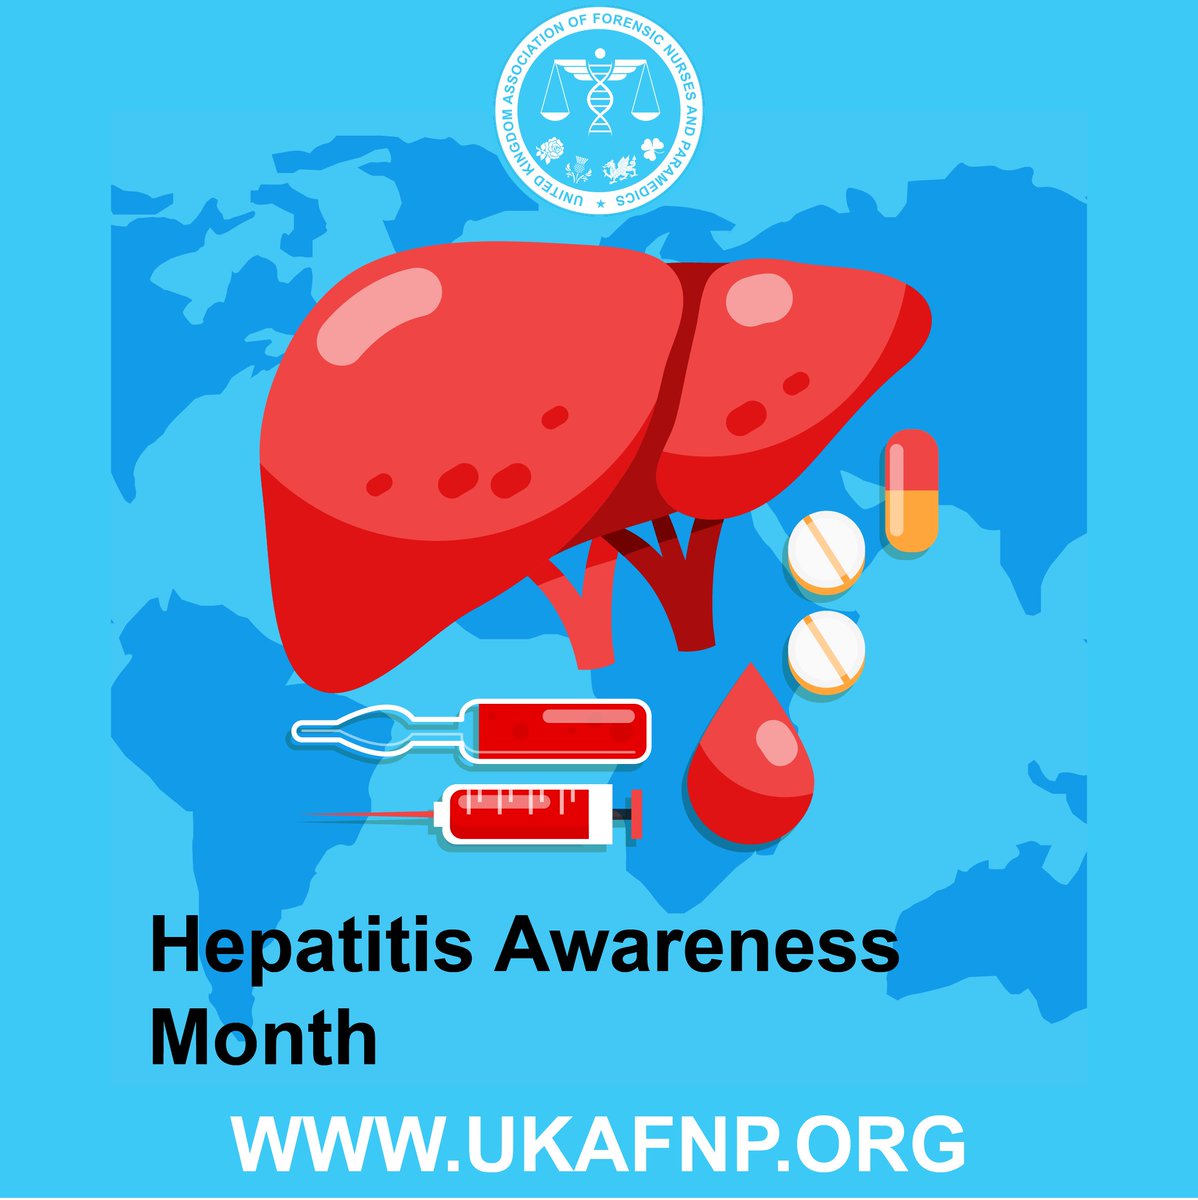 May is #HepatitisAwarenessMonth. This month, we focus on educating and raising awareness about hepatitis, a major global health threat. Stay tuned for facts and how it relates to forensic healthcare. #UKAFNP 🌍💉